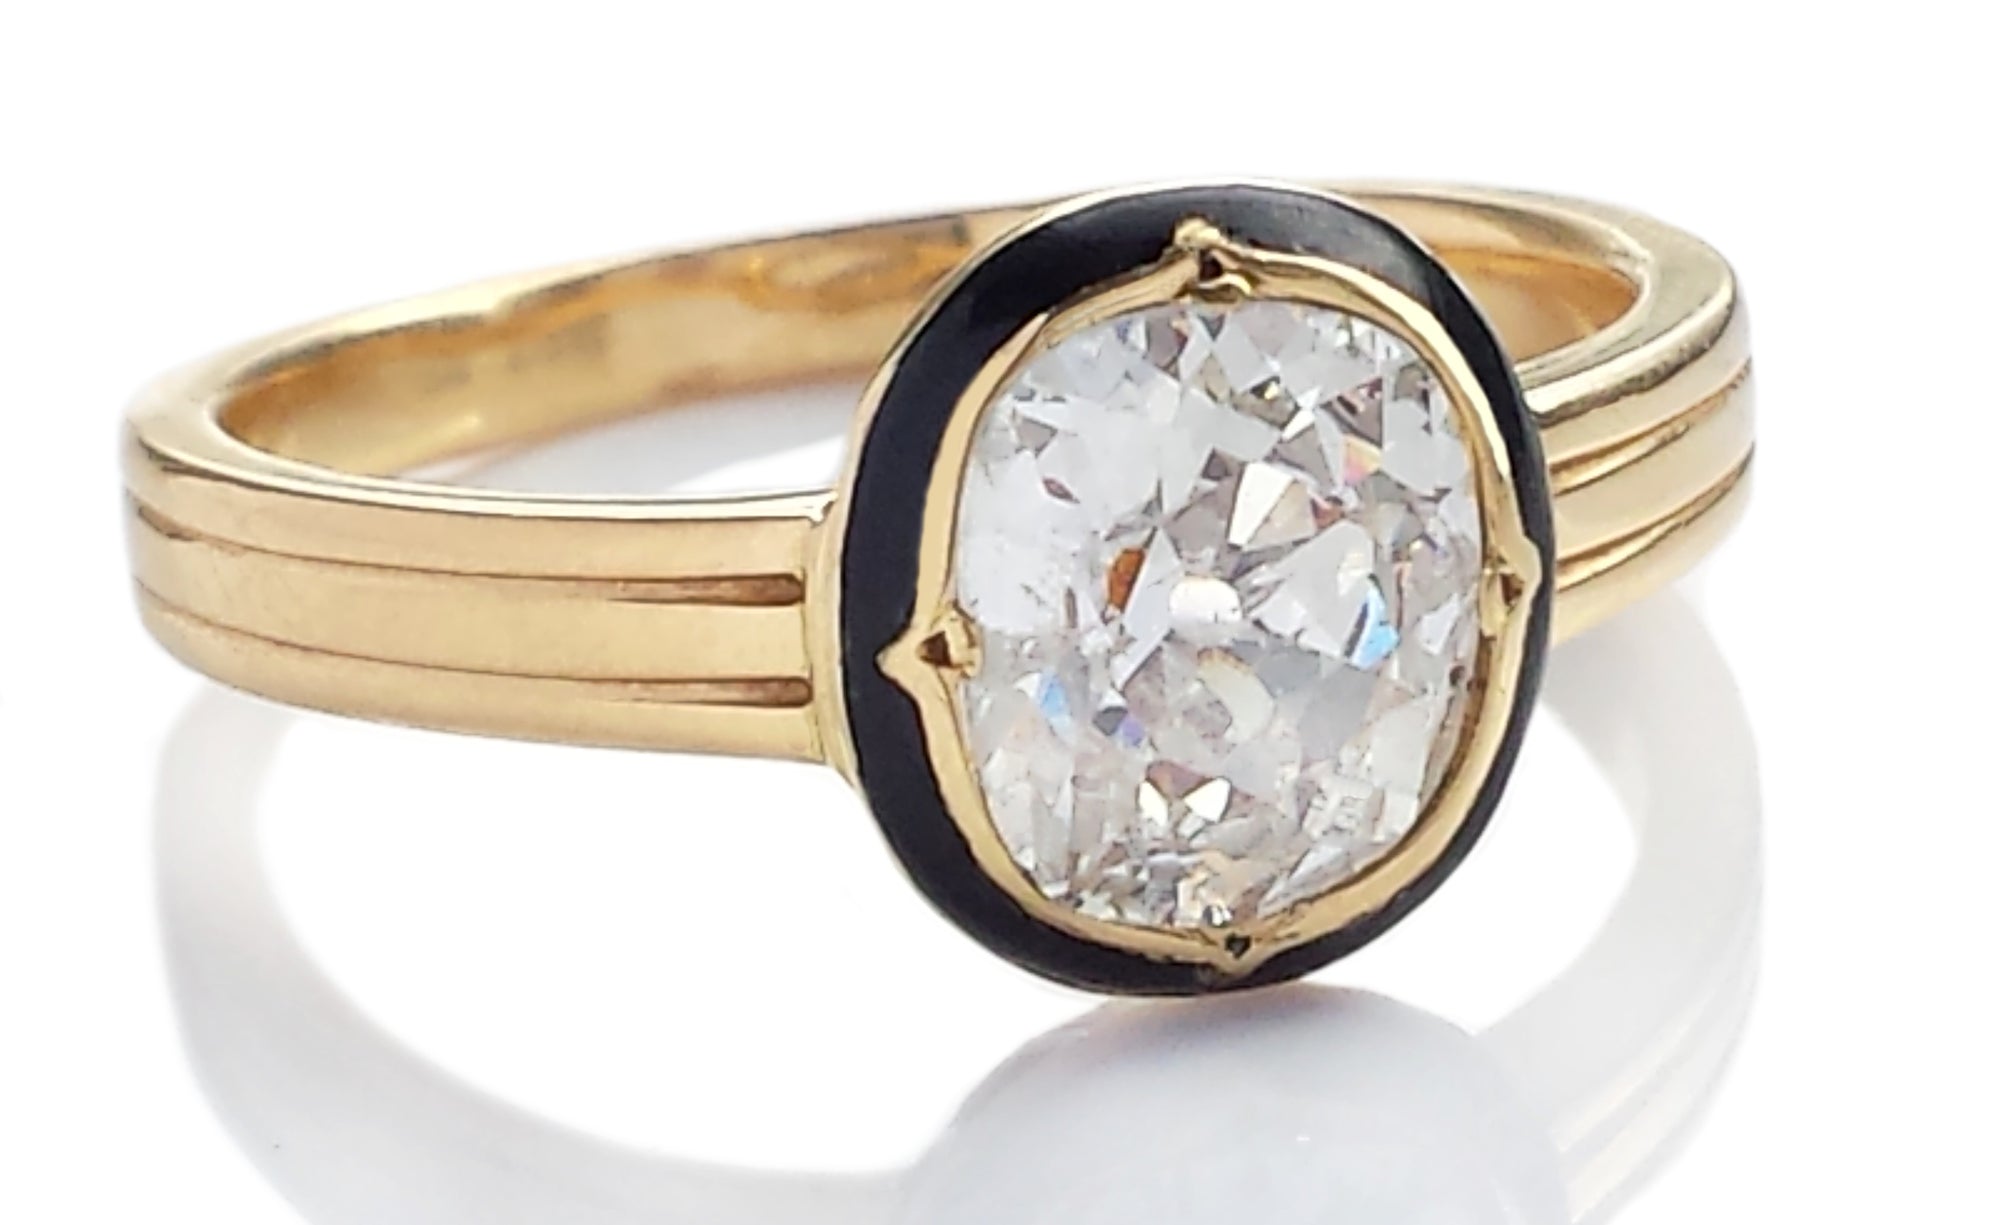 Antique 1.40ct G/I1 Old Mine Cut Diamond Engagement Ring in 18k Yellow Gold